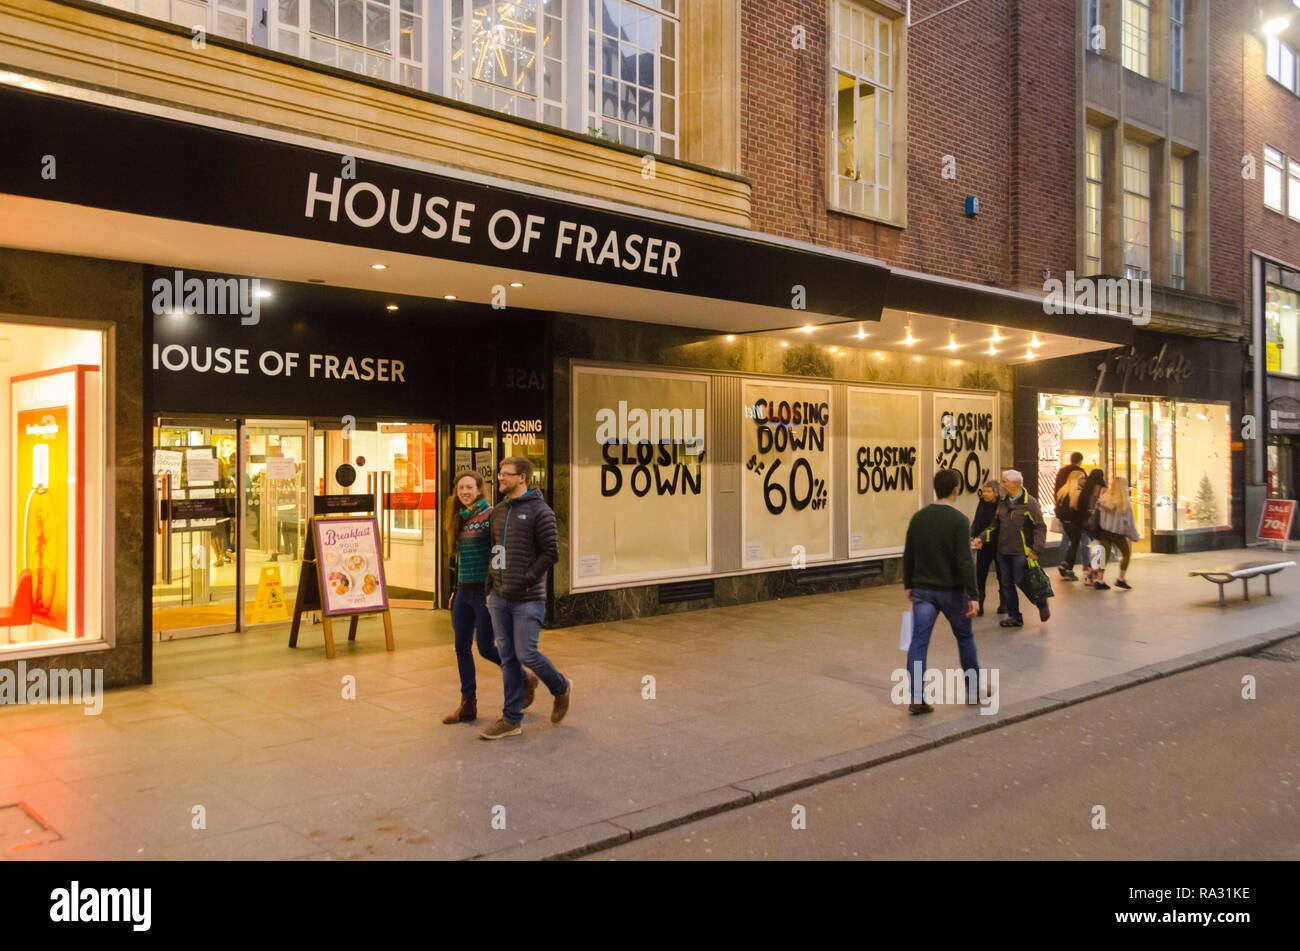 Exeter, Devon, UK. 30th Dec, 2018. The House of Fraser department store at Exeter in Devon, which is closing down in January 2018. The store is displaying closing down signs and has a sale with 60% off. Picture Credit: Graham Hunt/Alamy Live News Stock Photo